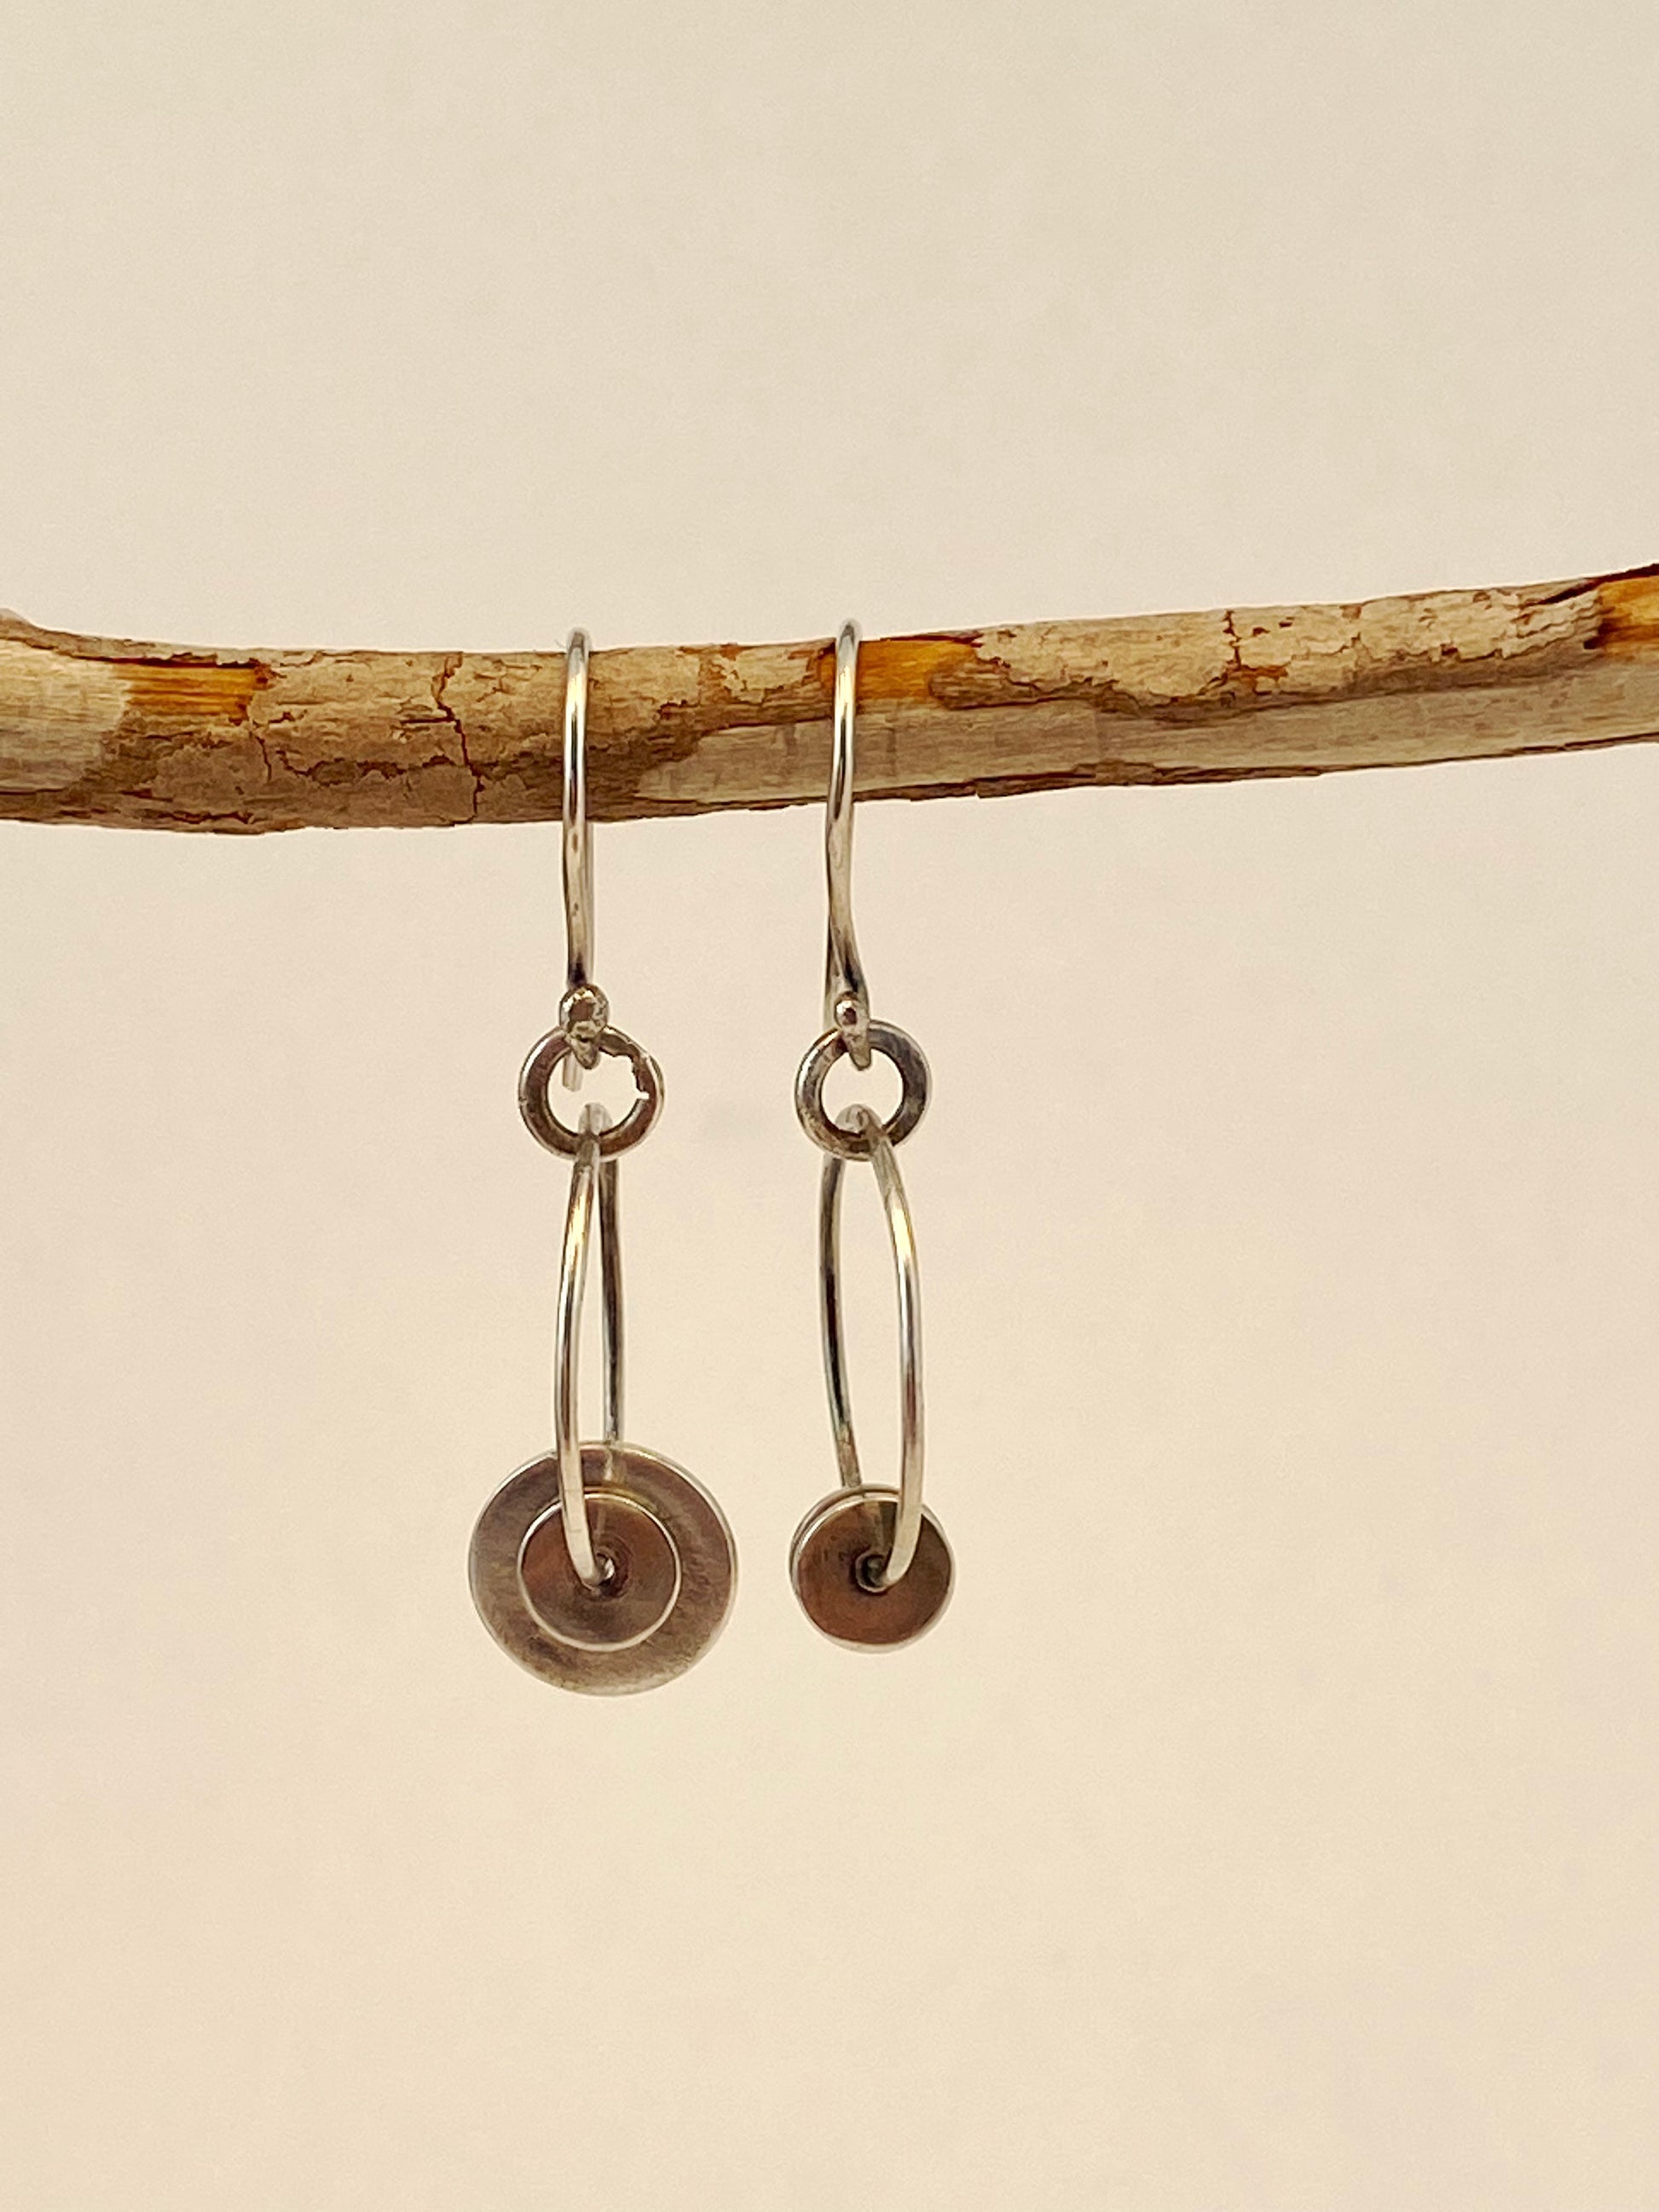 One-of-a-kind hand-crafted hoop earrings with sterling disks and handmade ear wire.  Style: rustic, boho, elemental, earthy yet elegant